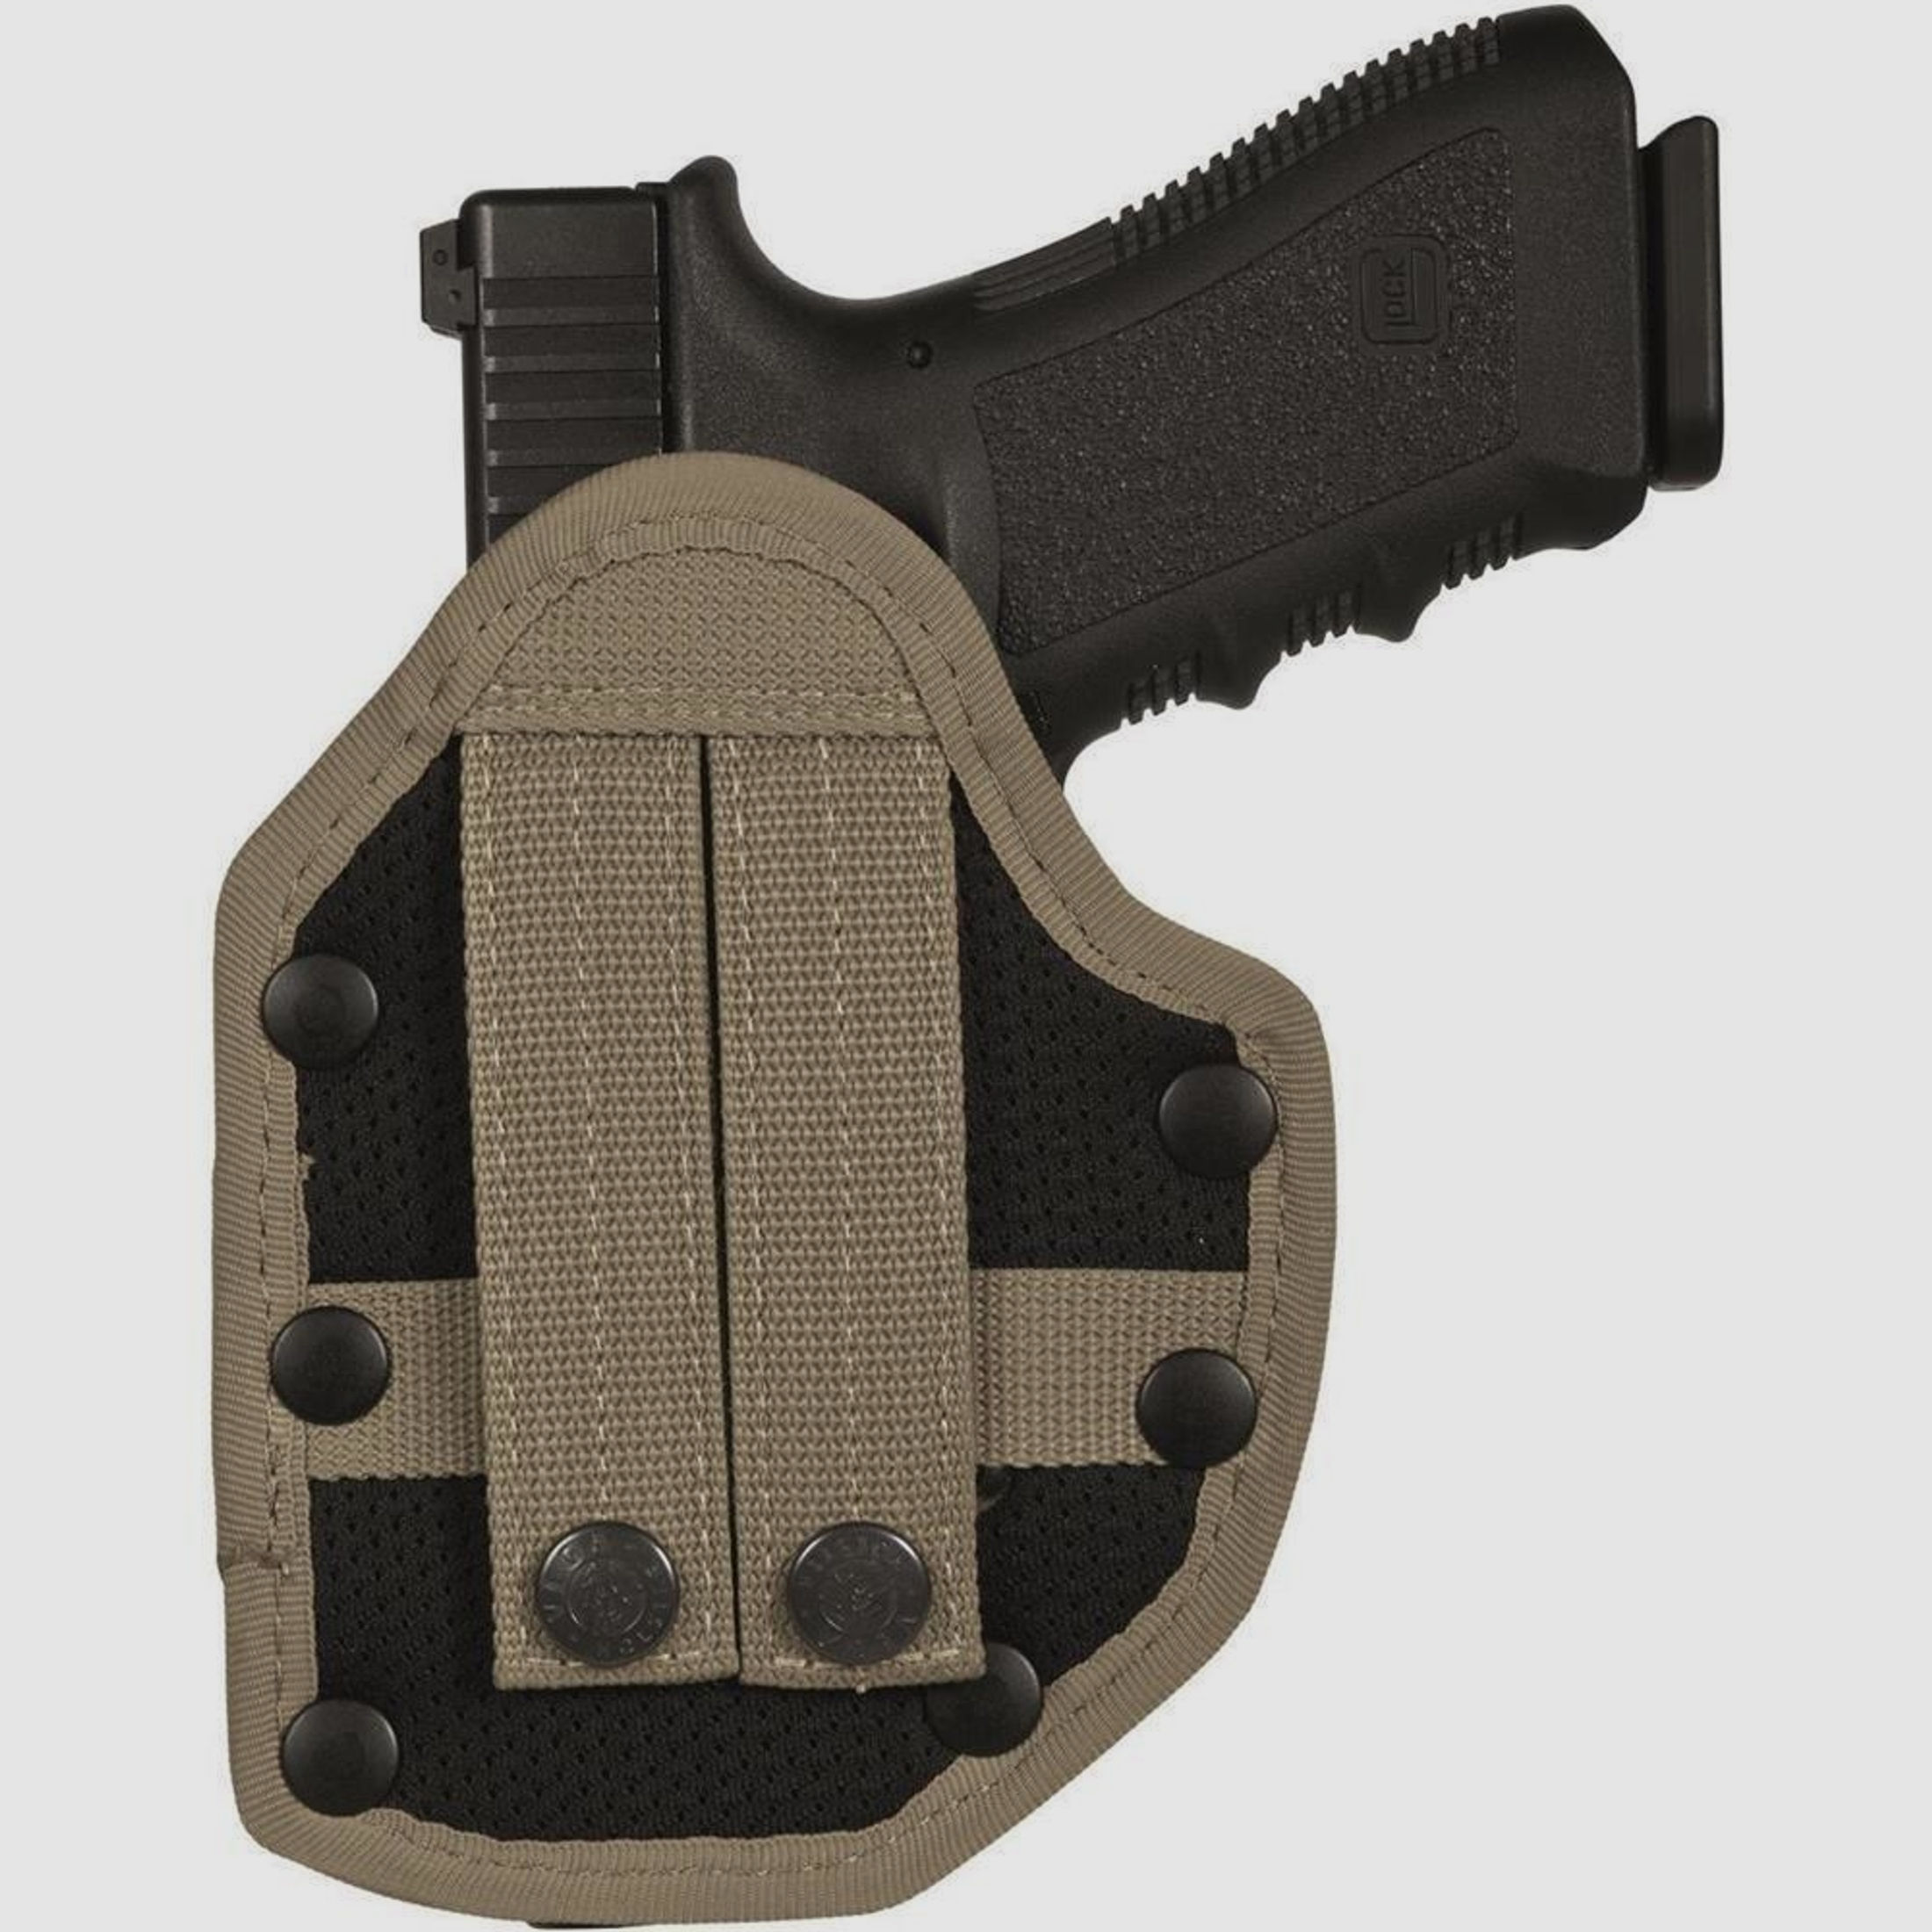 Thermogeformtes Polymerholster "KEEPER" Colt 1911 / Government,Para Ordnance P14/P16,Sig Sauer 1911,S&W 1911,Springfield 1911-Coyote TAN-Rechtshänder